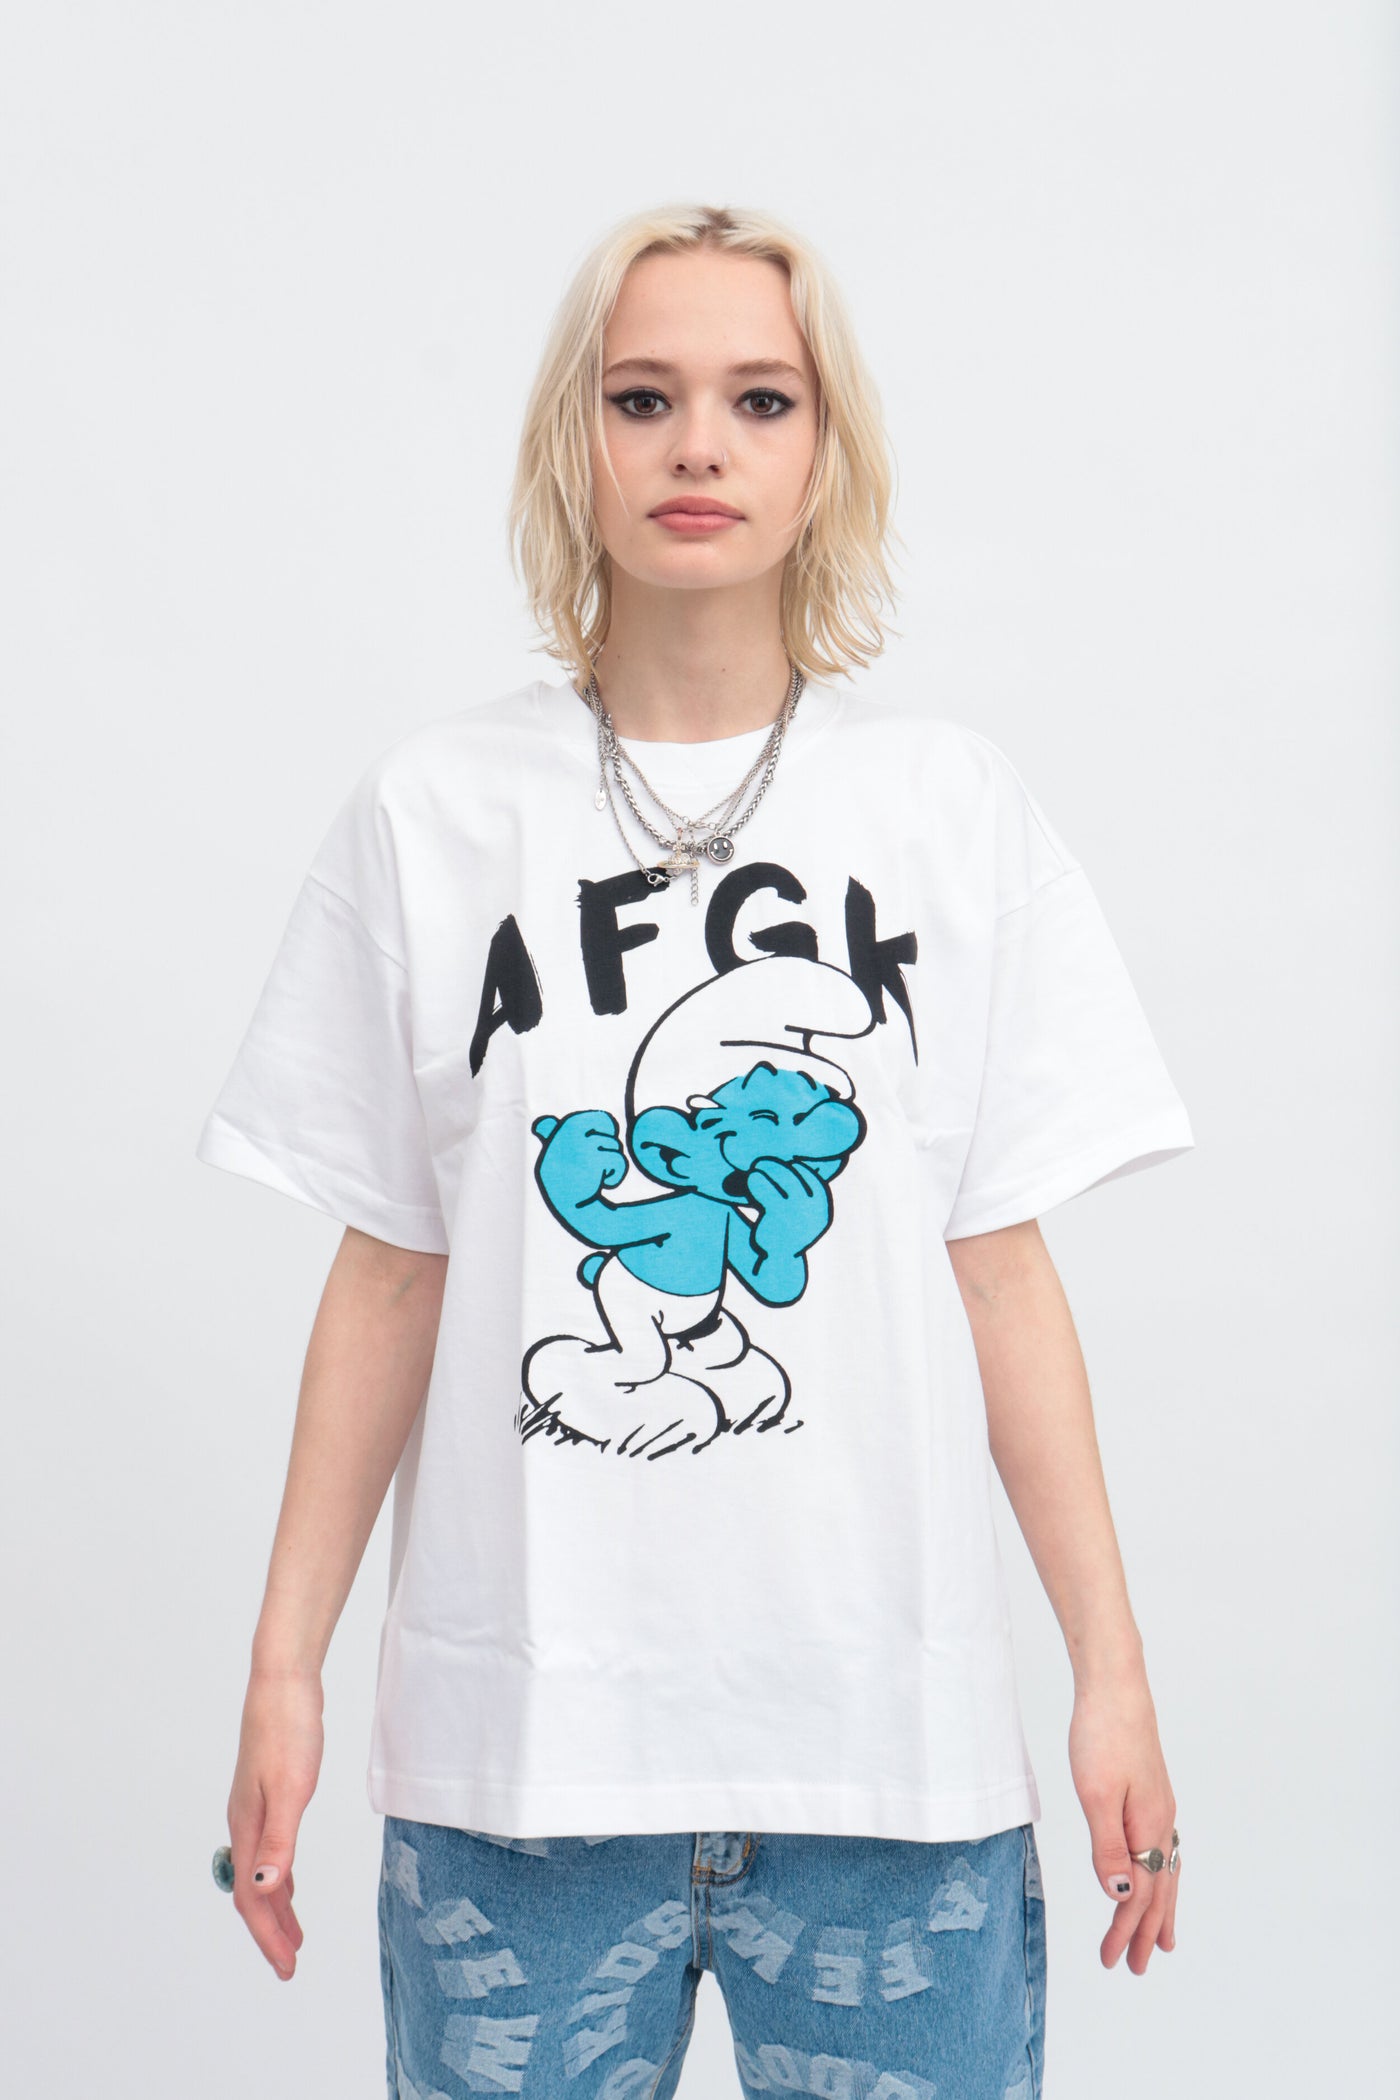 DONCARE (AFGK) "The Smurfs Tee" - White